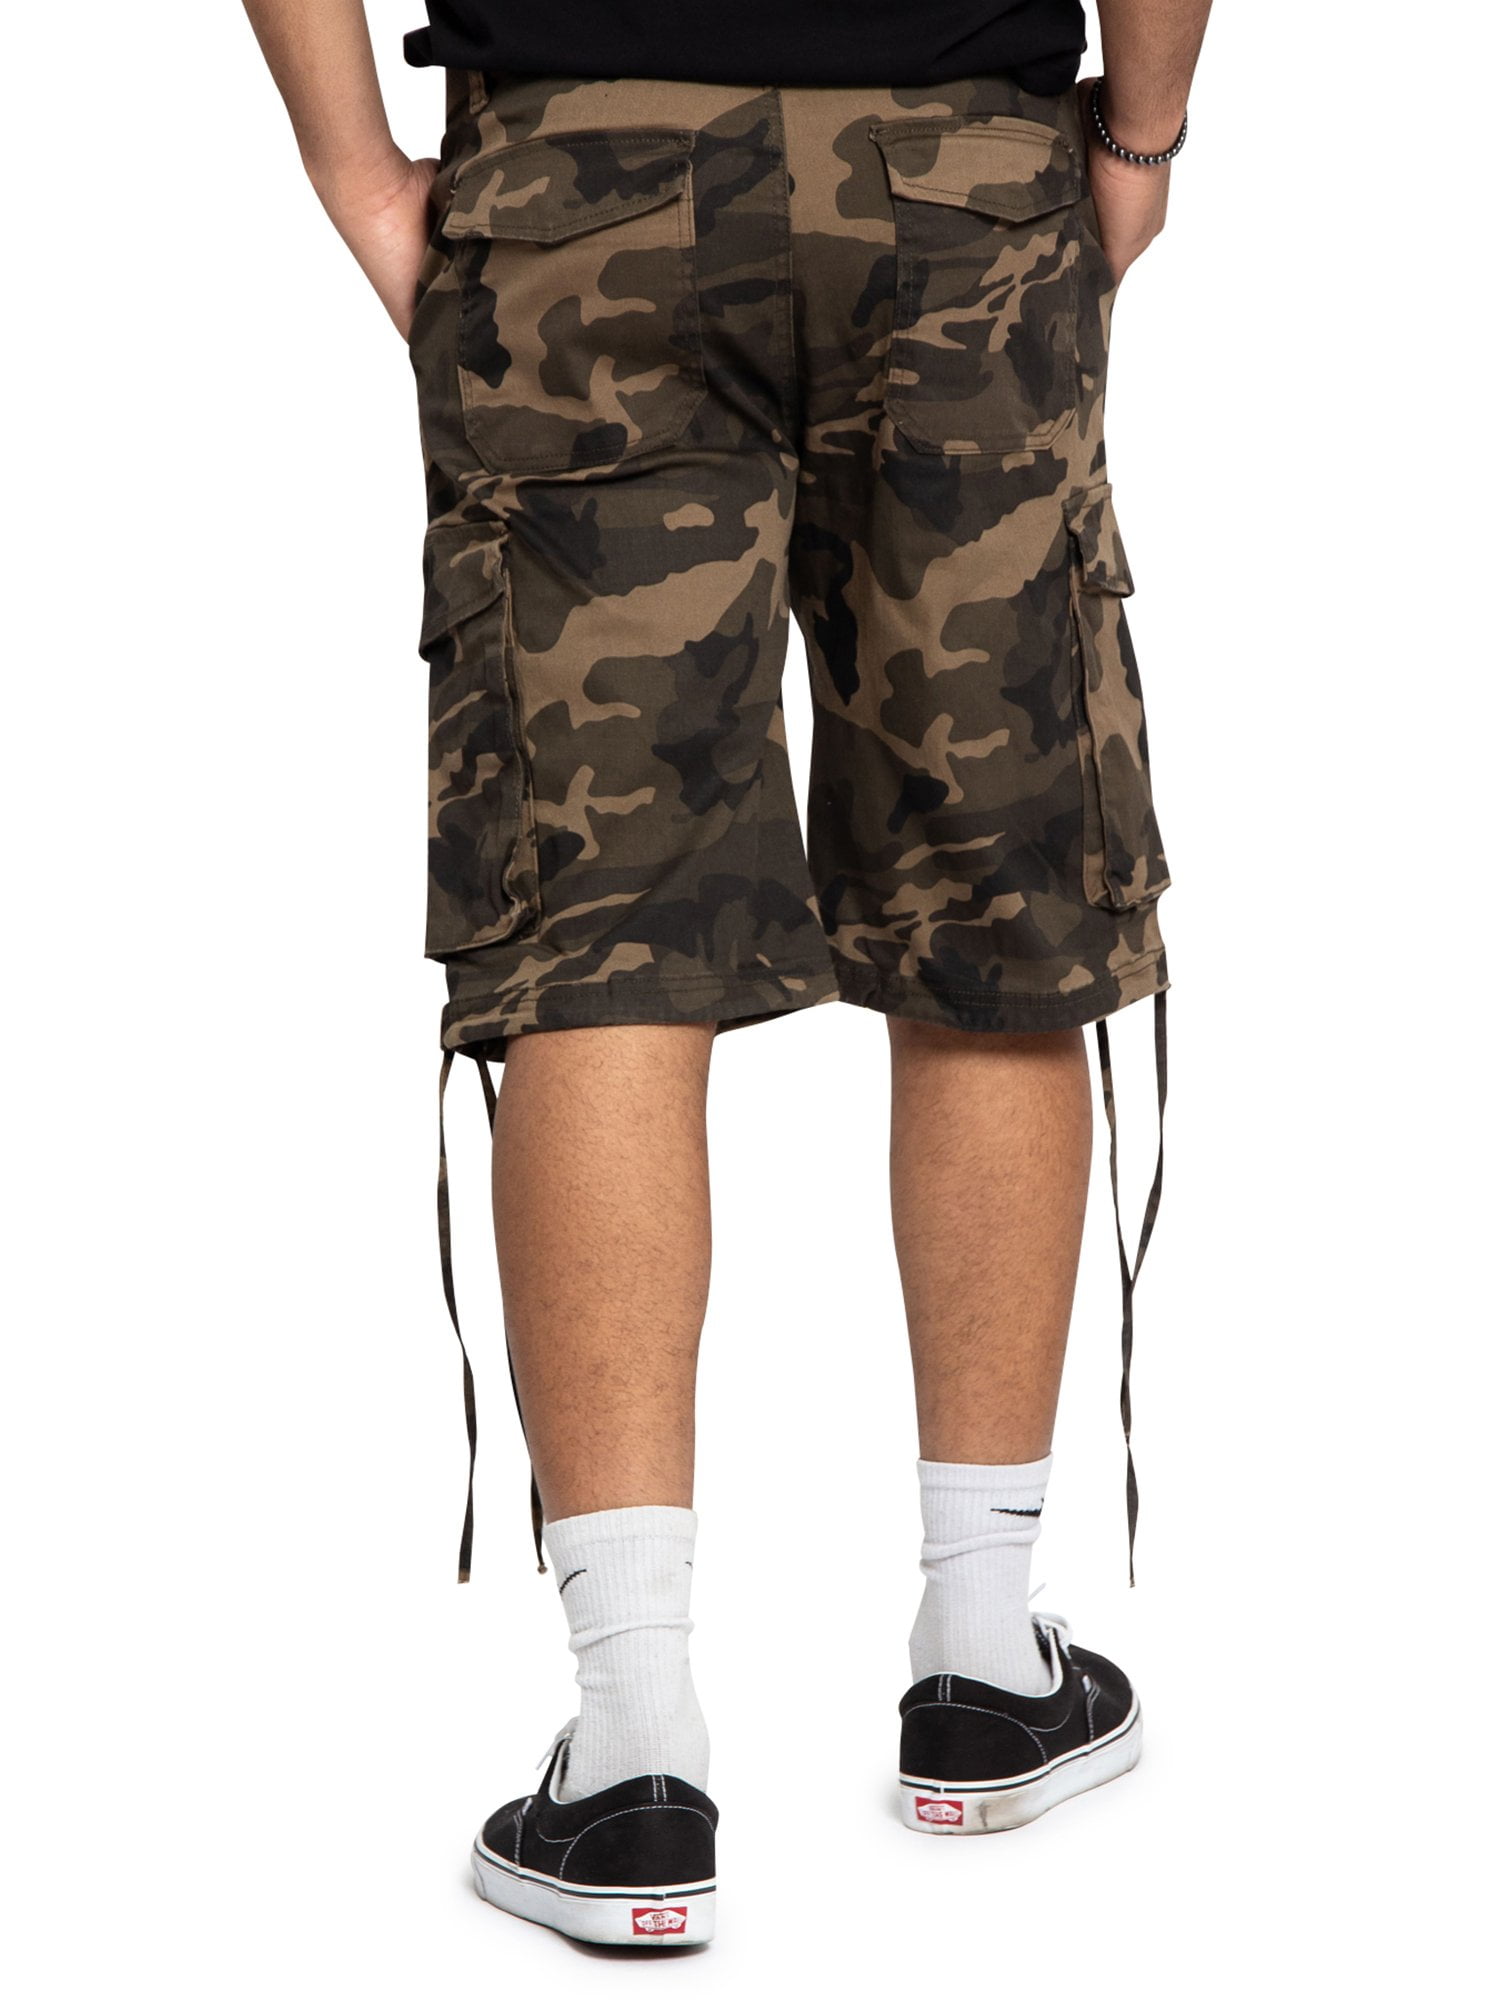 Victorious Men's Belted Twill Camo Cargo Short, Up to Size 44W 